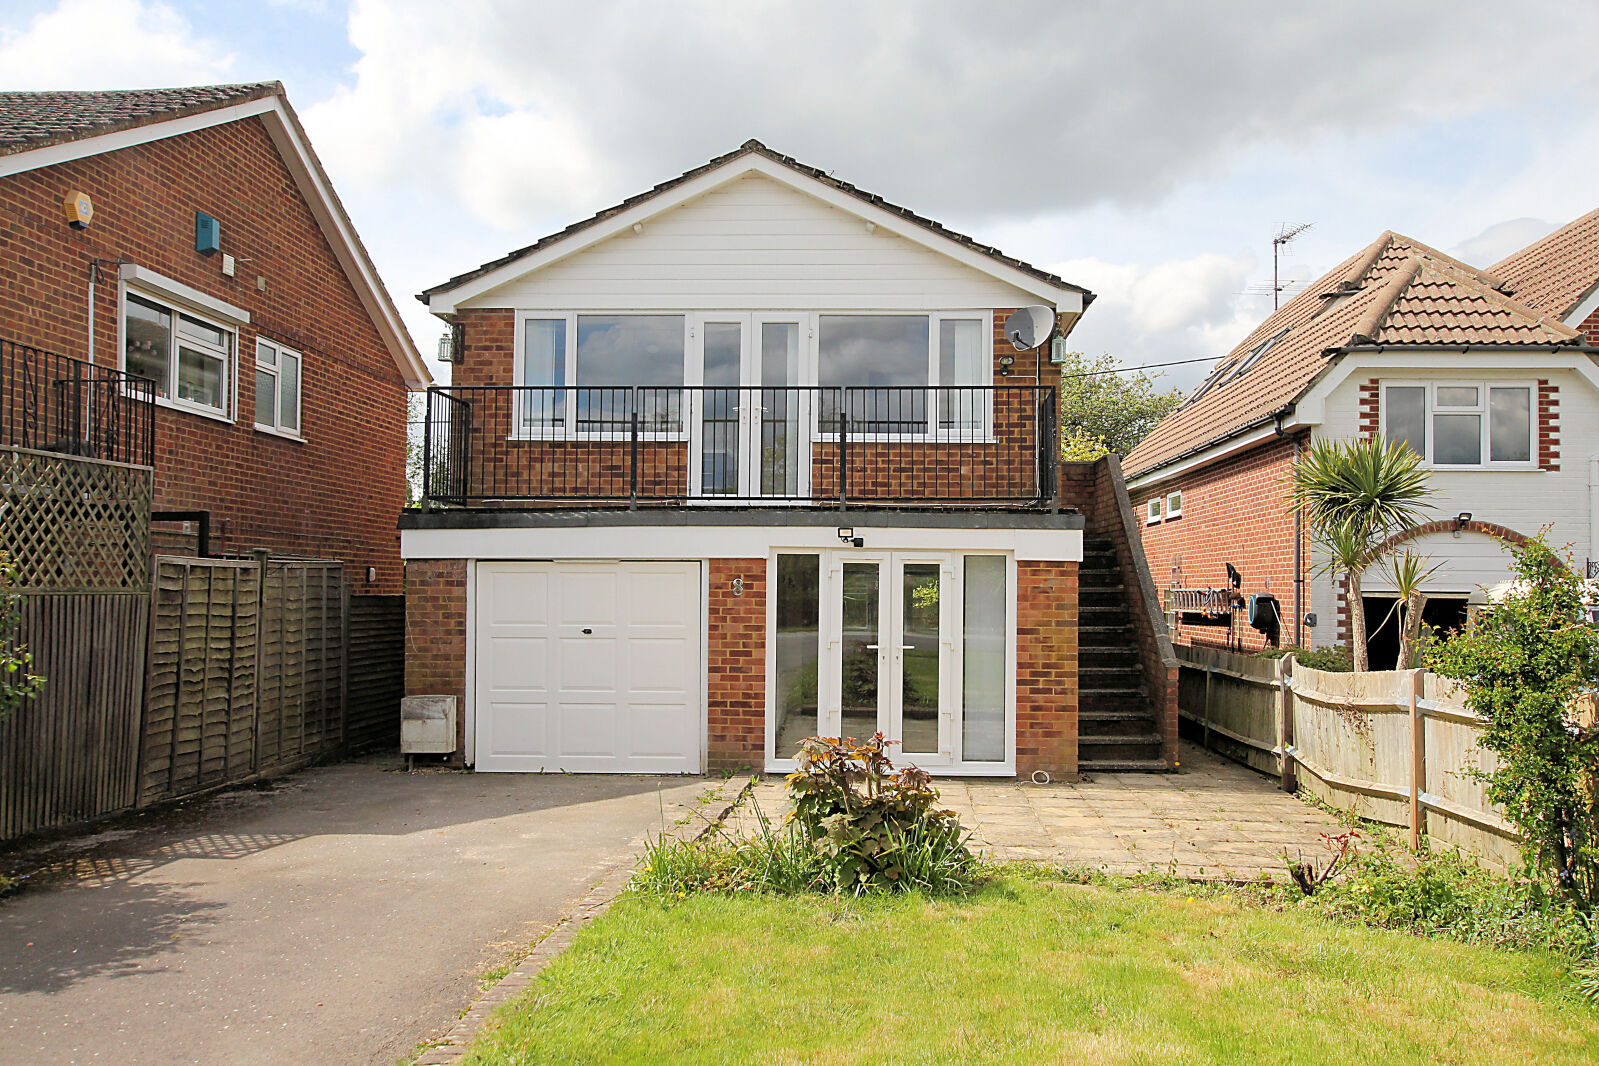 2 bedroom detached house to rent, Available unfurnished now River Gardens, Reading, RG8, main image